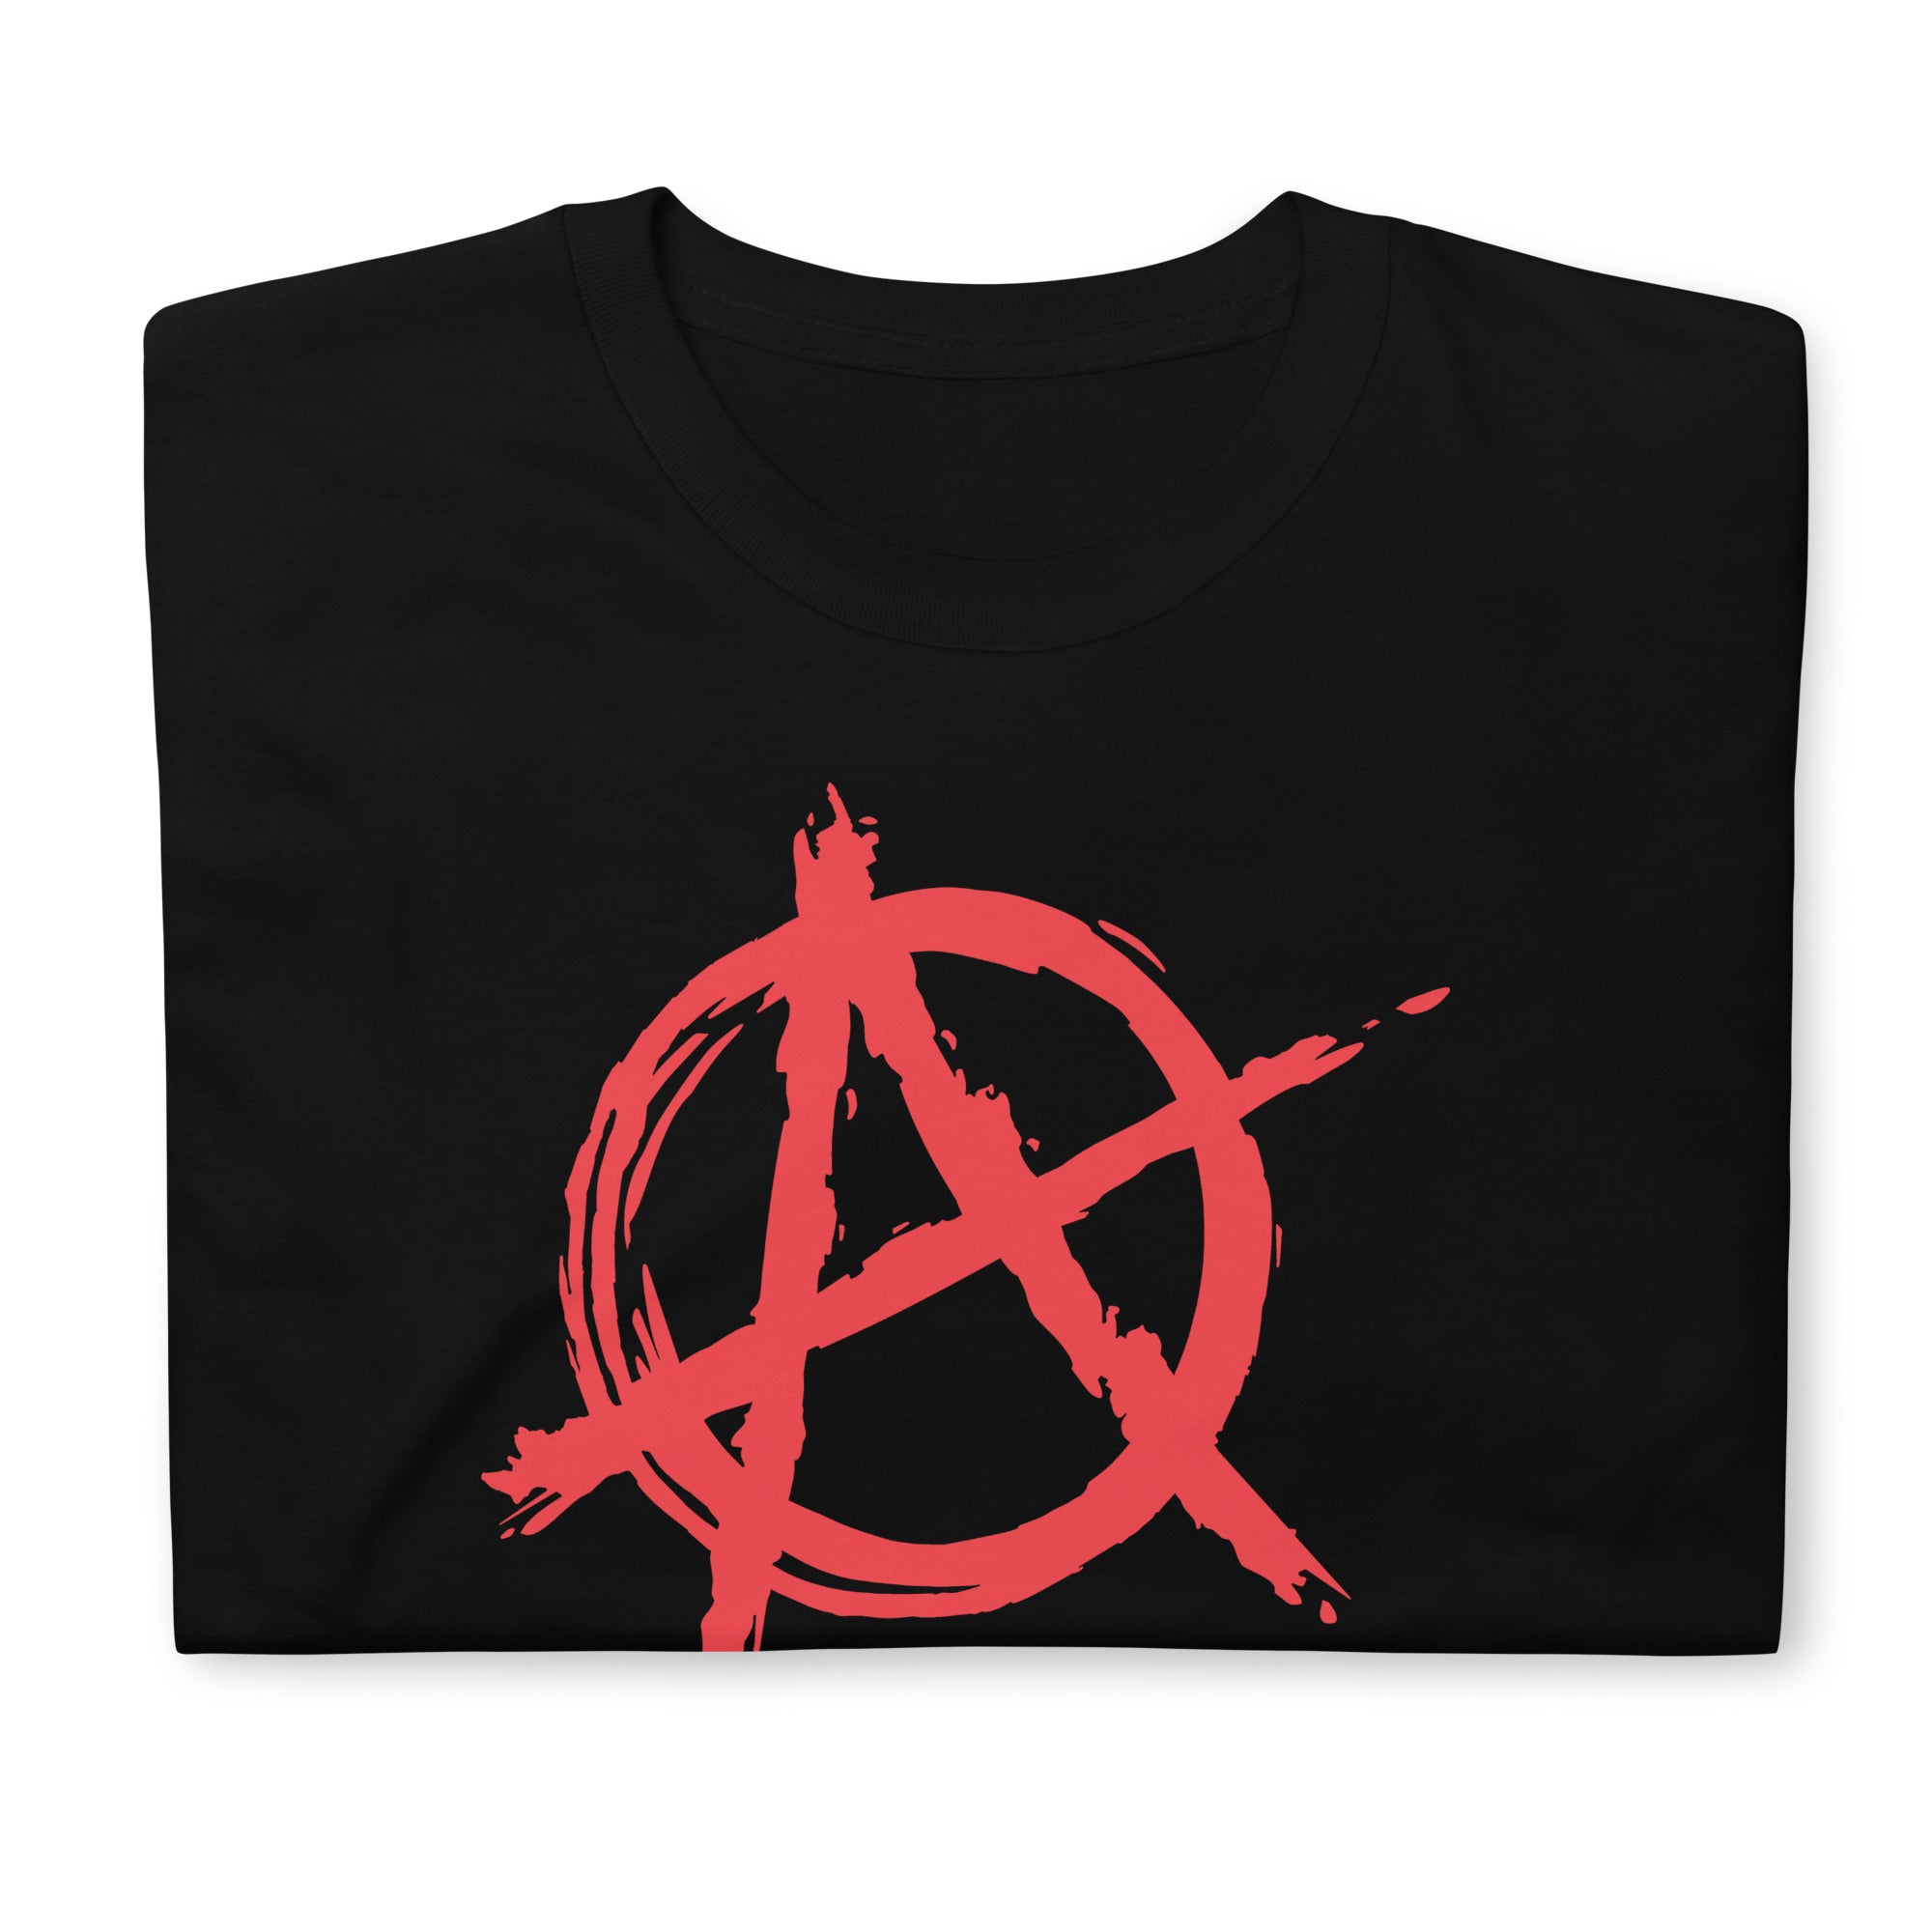 Red Anarchy is Order Symbol Punk Rock Men's Short-Sleeve T-Shirt - Edge of Life Designs